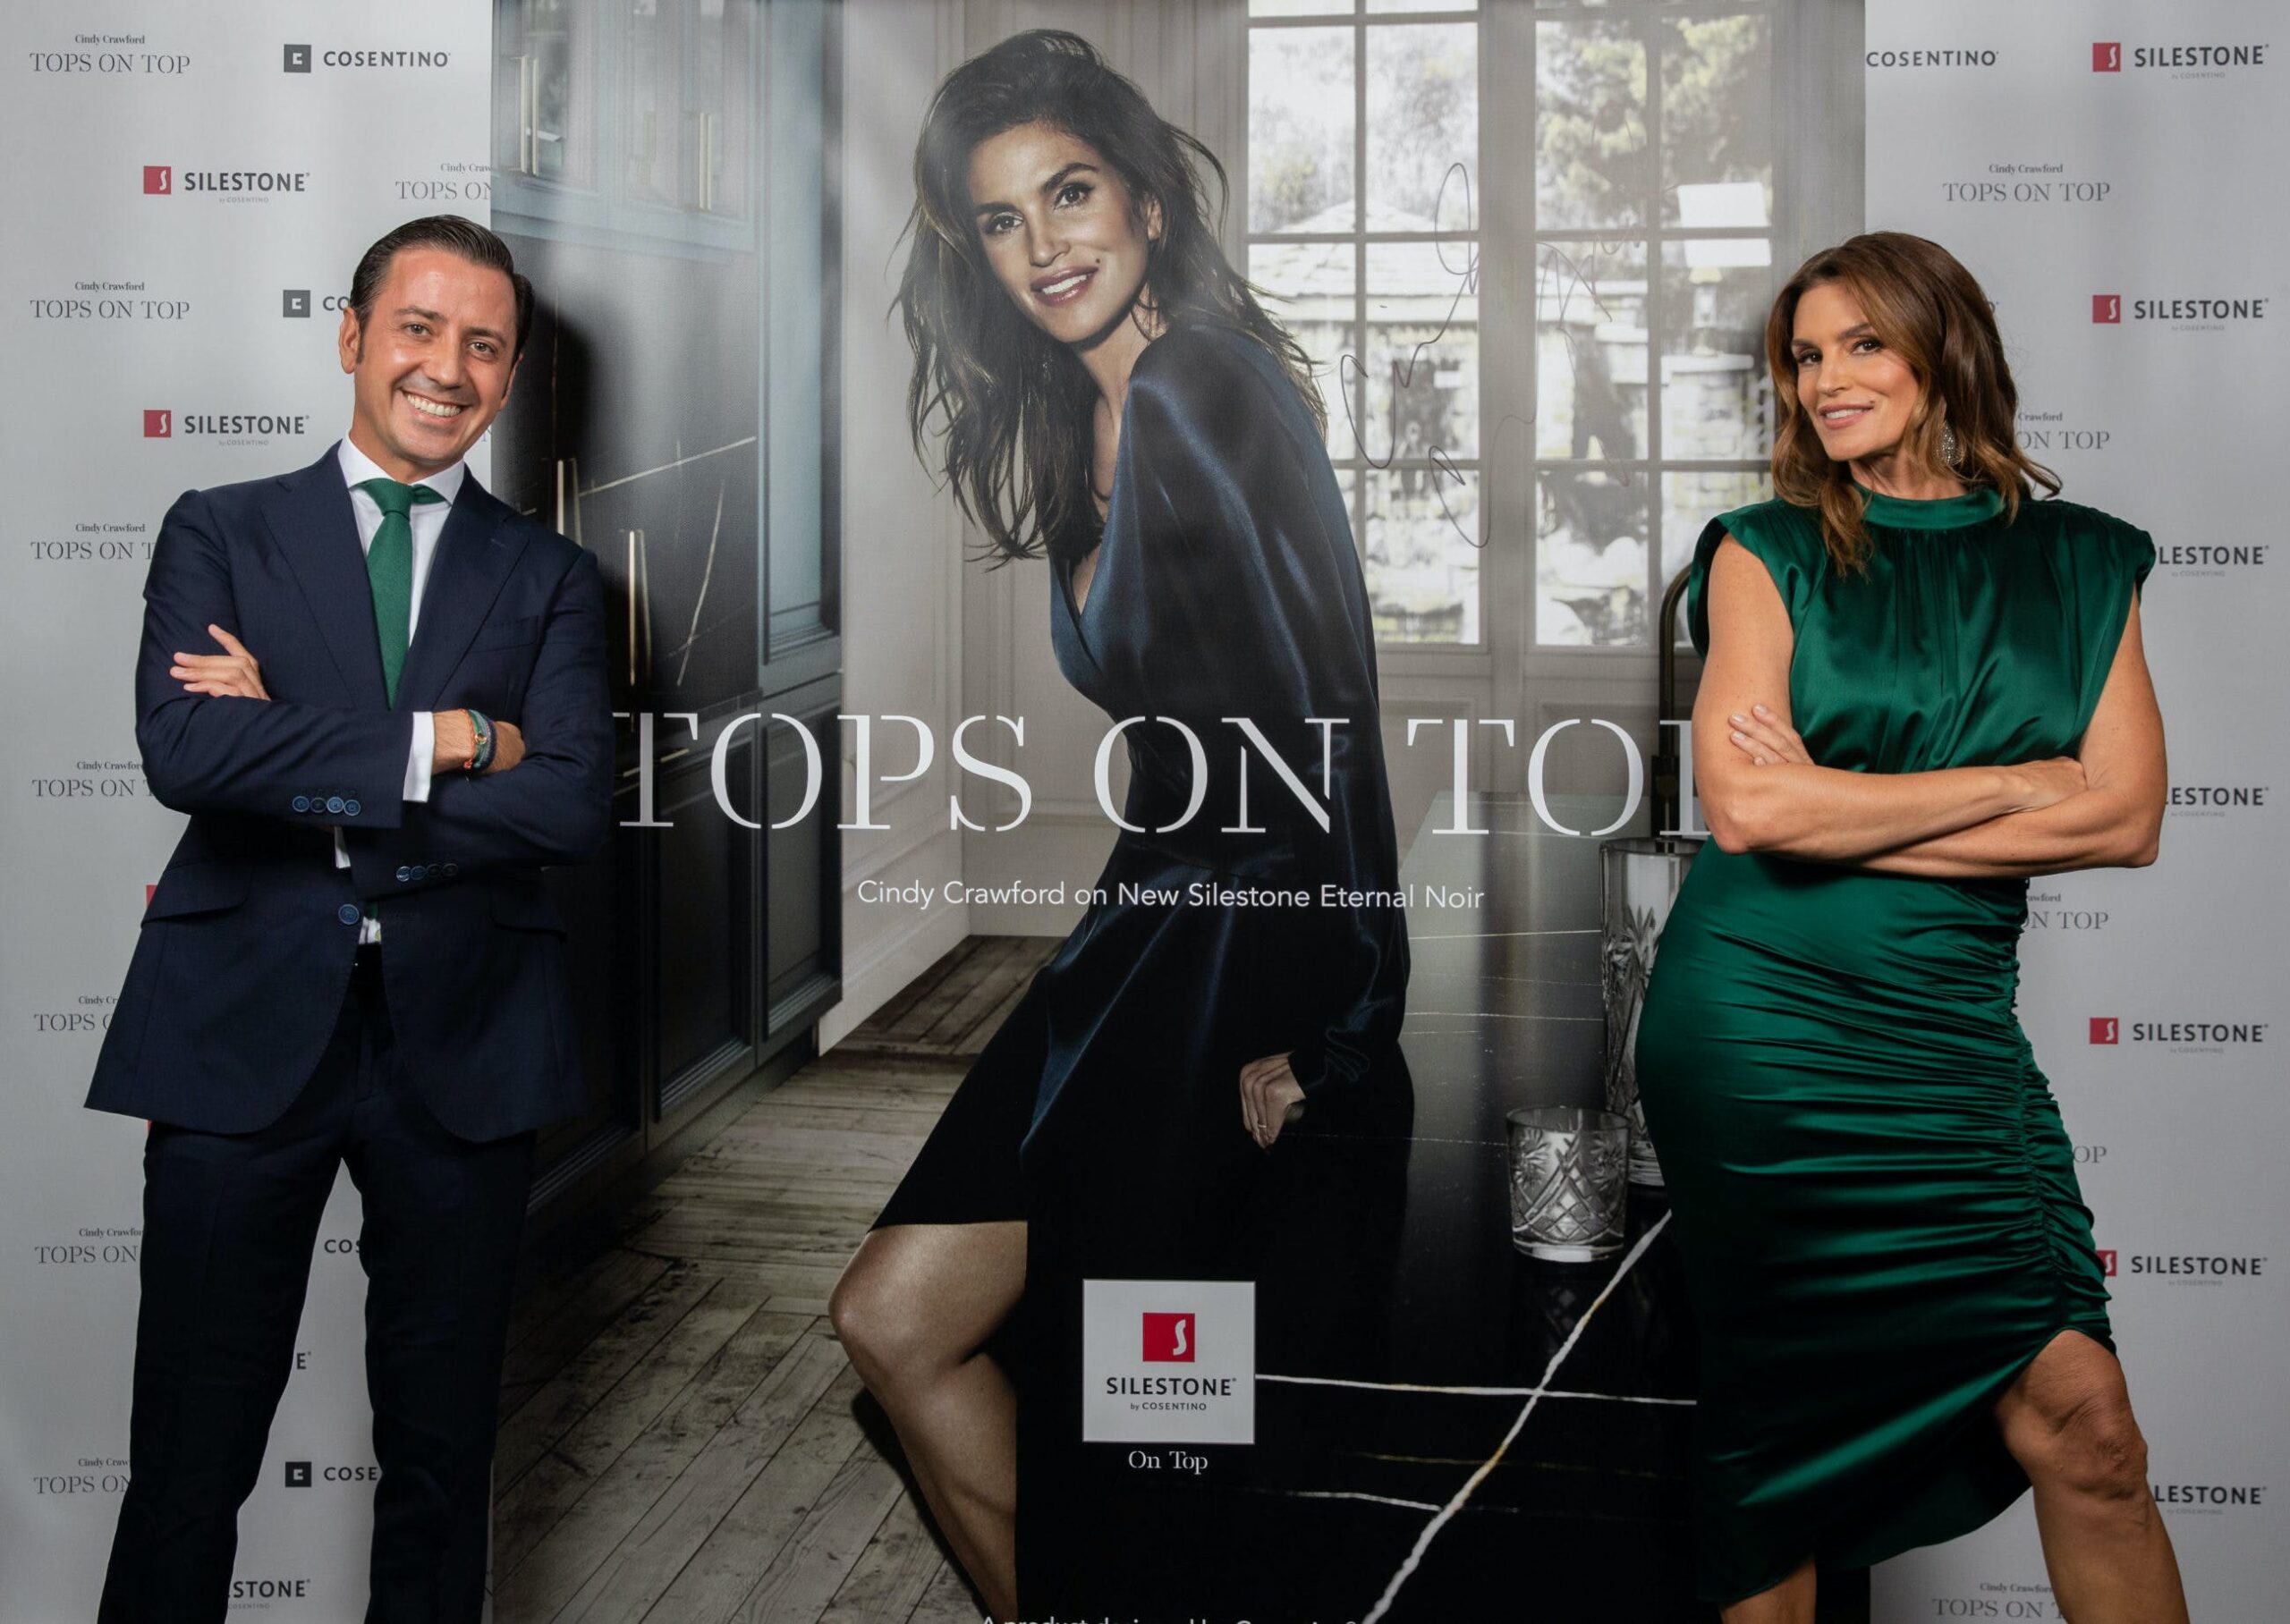 Image of Eduardo Cosentino y Cindy Crawford Tops On Top 2019 Londres 1 scaled in Silestone® Presents its New "Tops on Top 2019" Campaign Featuring Cindy Crawford - Cosentino